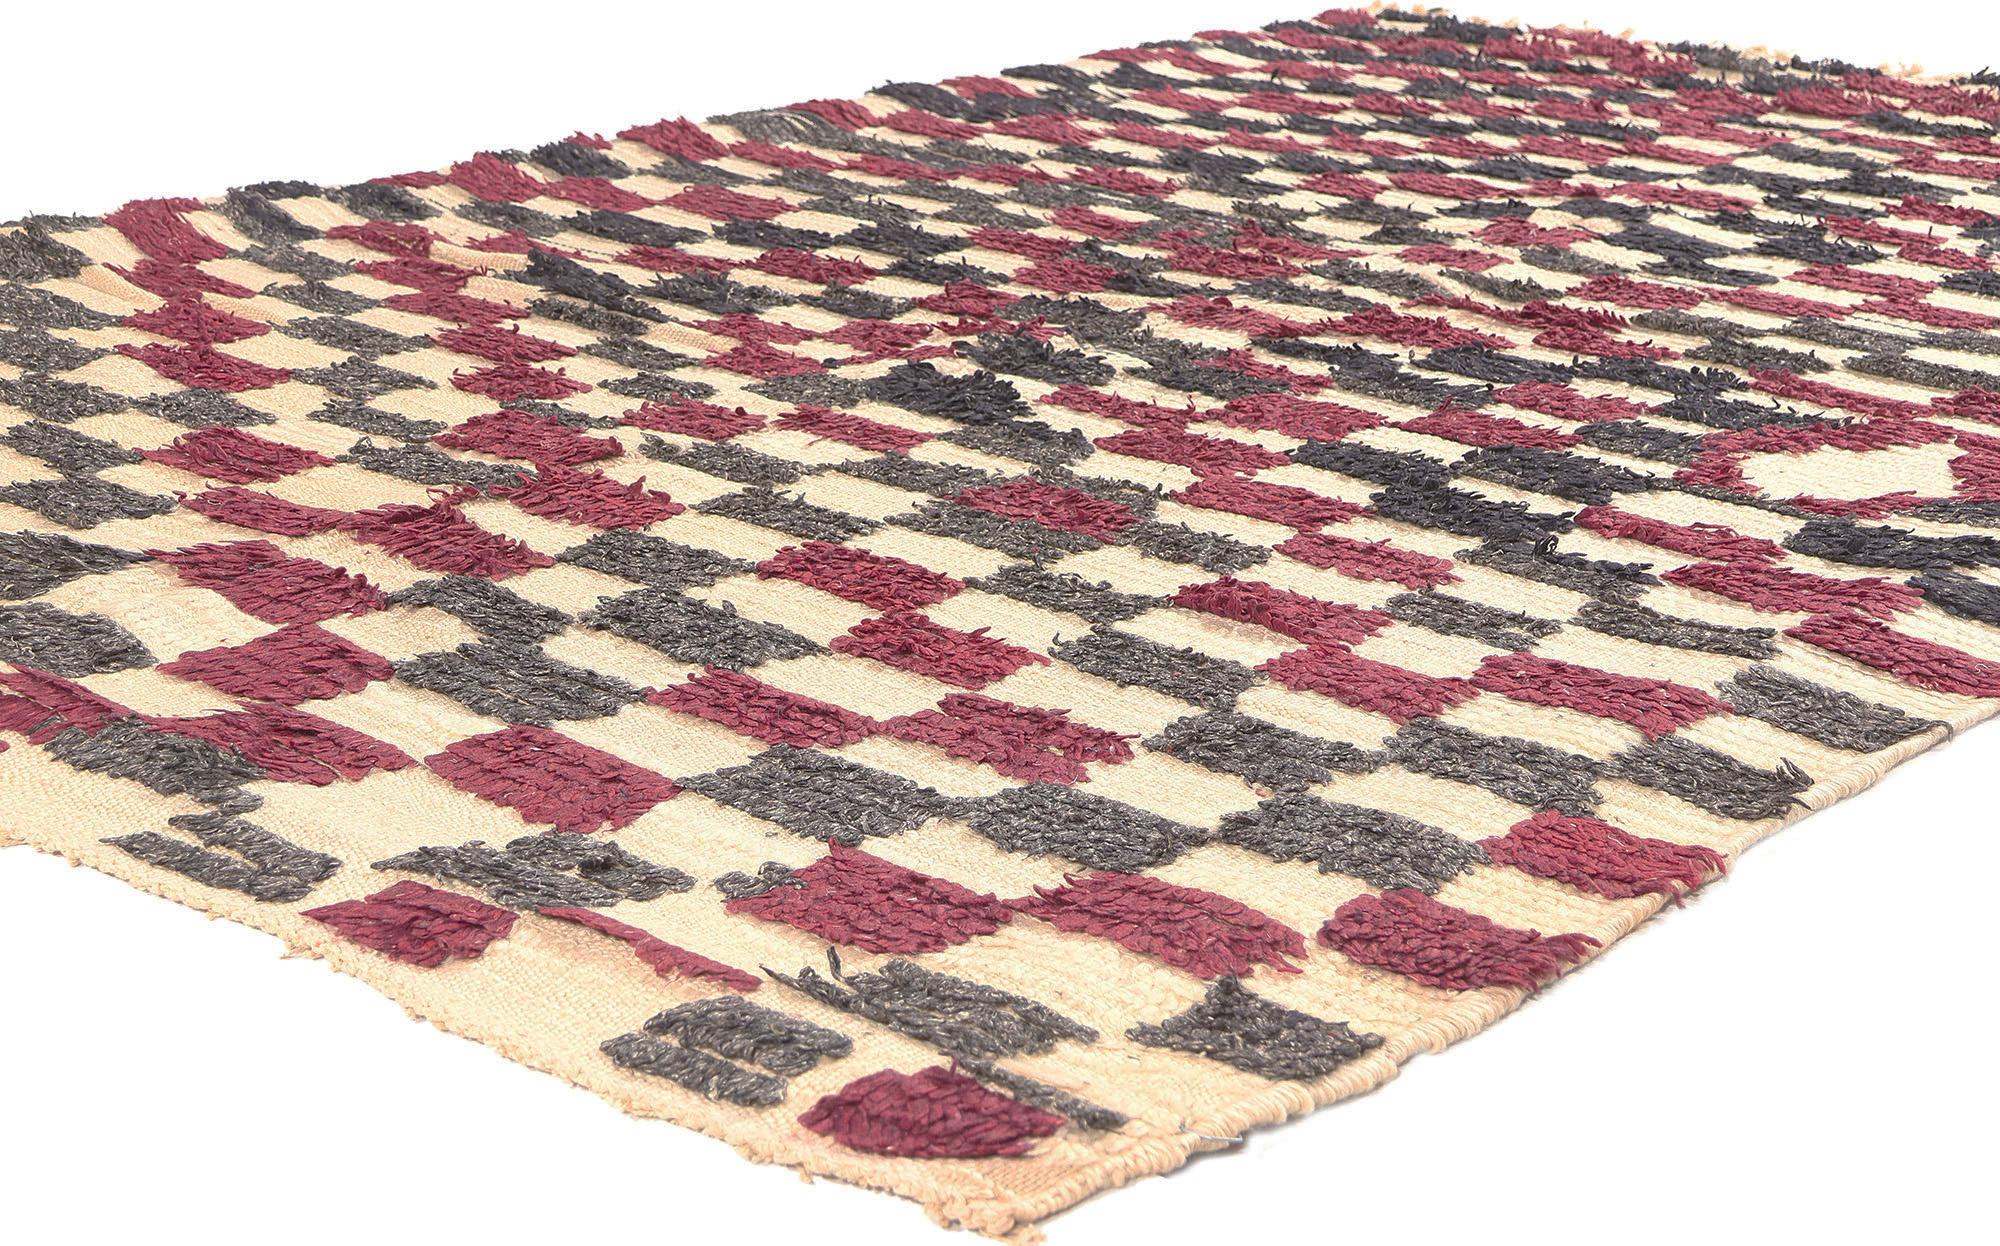 20402 Vintage Rehamna Moroccan Rug, 05'02 x 07'07. 

Discover the allure of this hand-knotted wool vintage Moroccan rug, hailing from Rehamna in the central plains east of Marrakech, Morocco—an area steeped in tradition and renowned for crafting